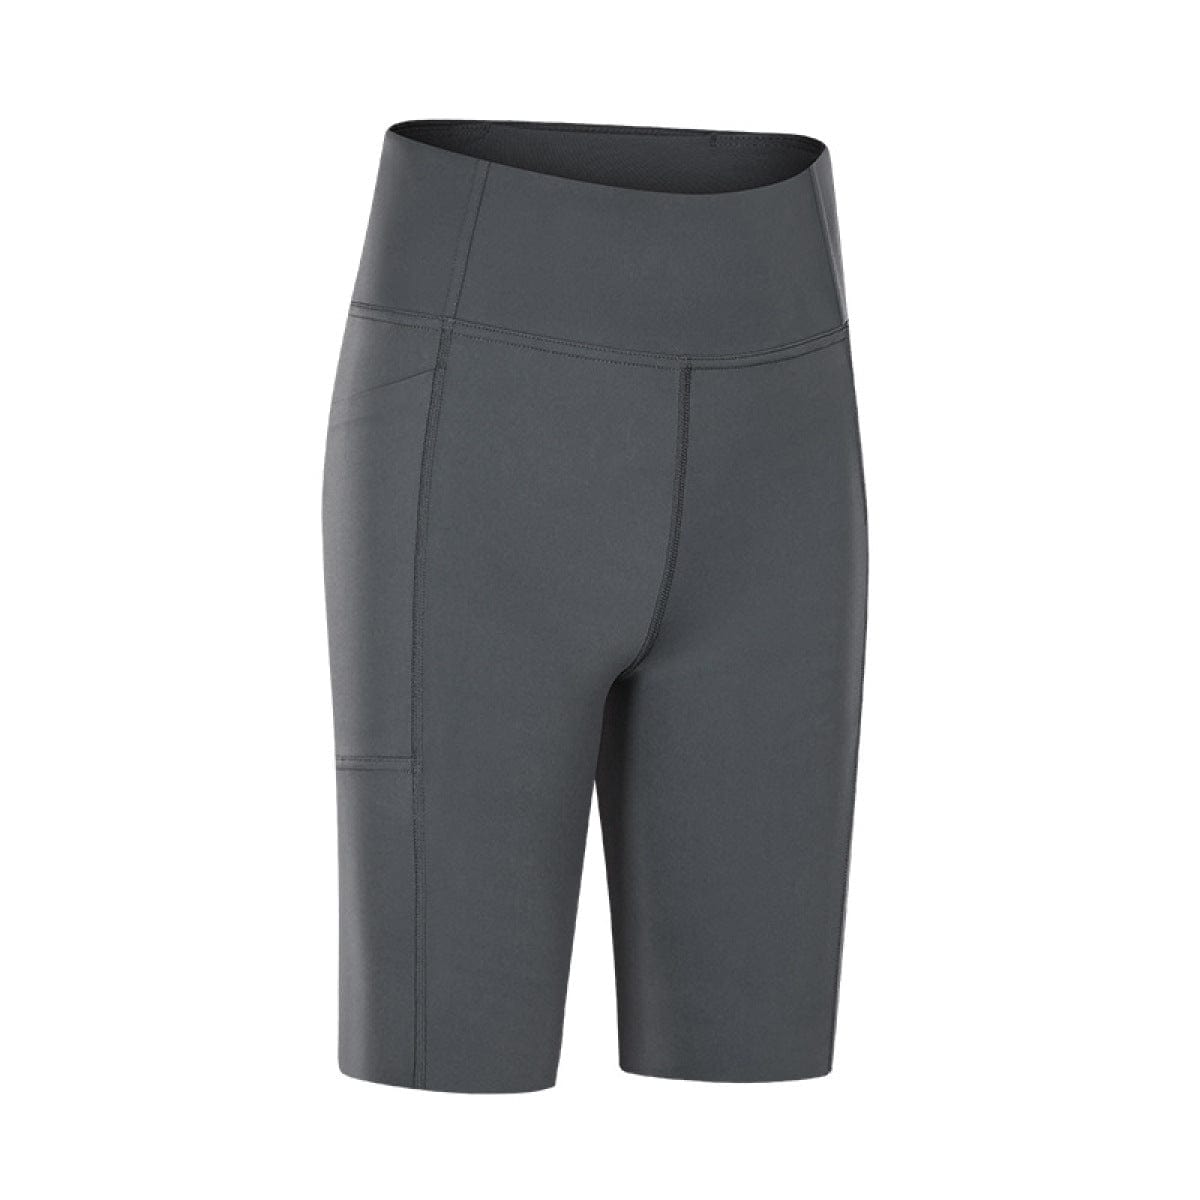 Solid Color Side Pockets Yoga Shorts Gray